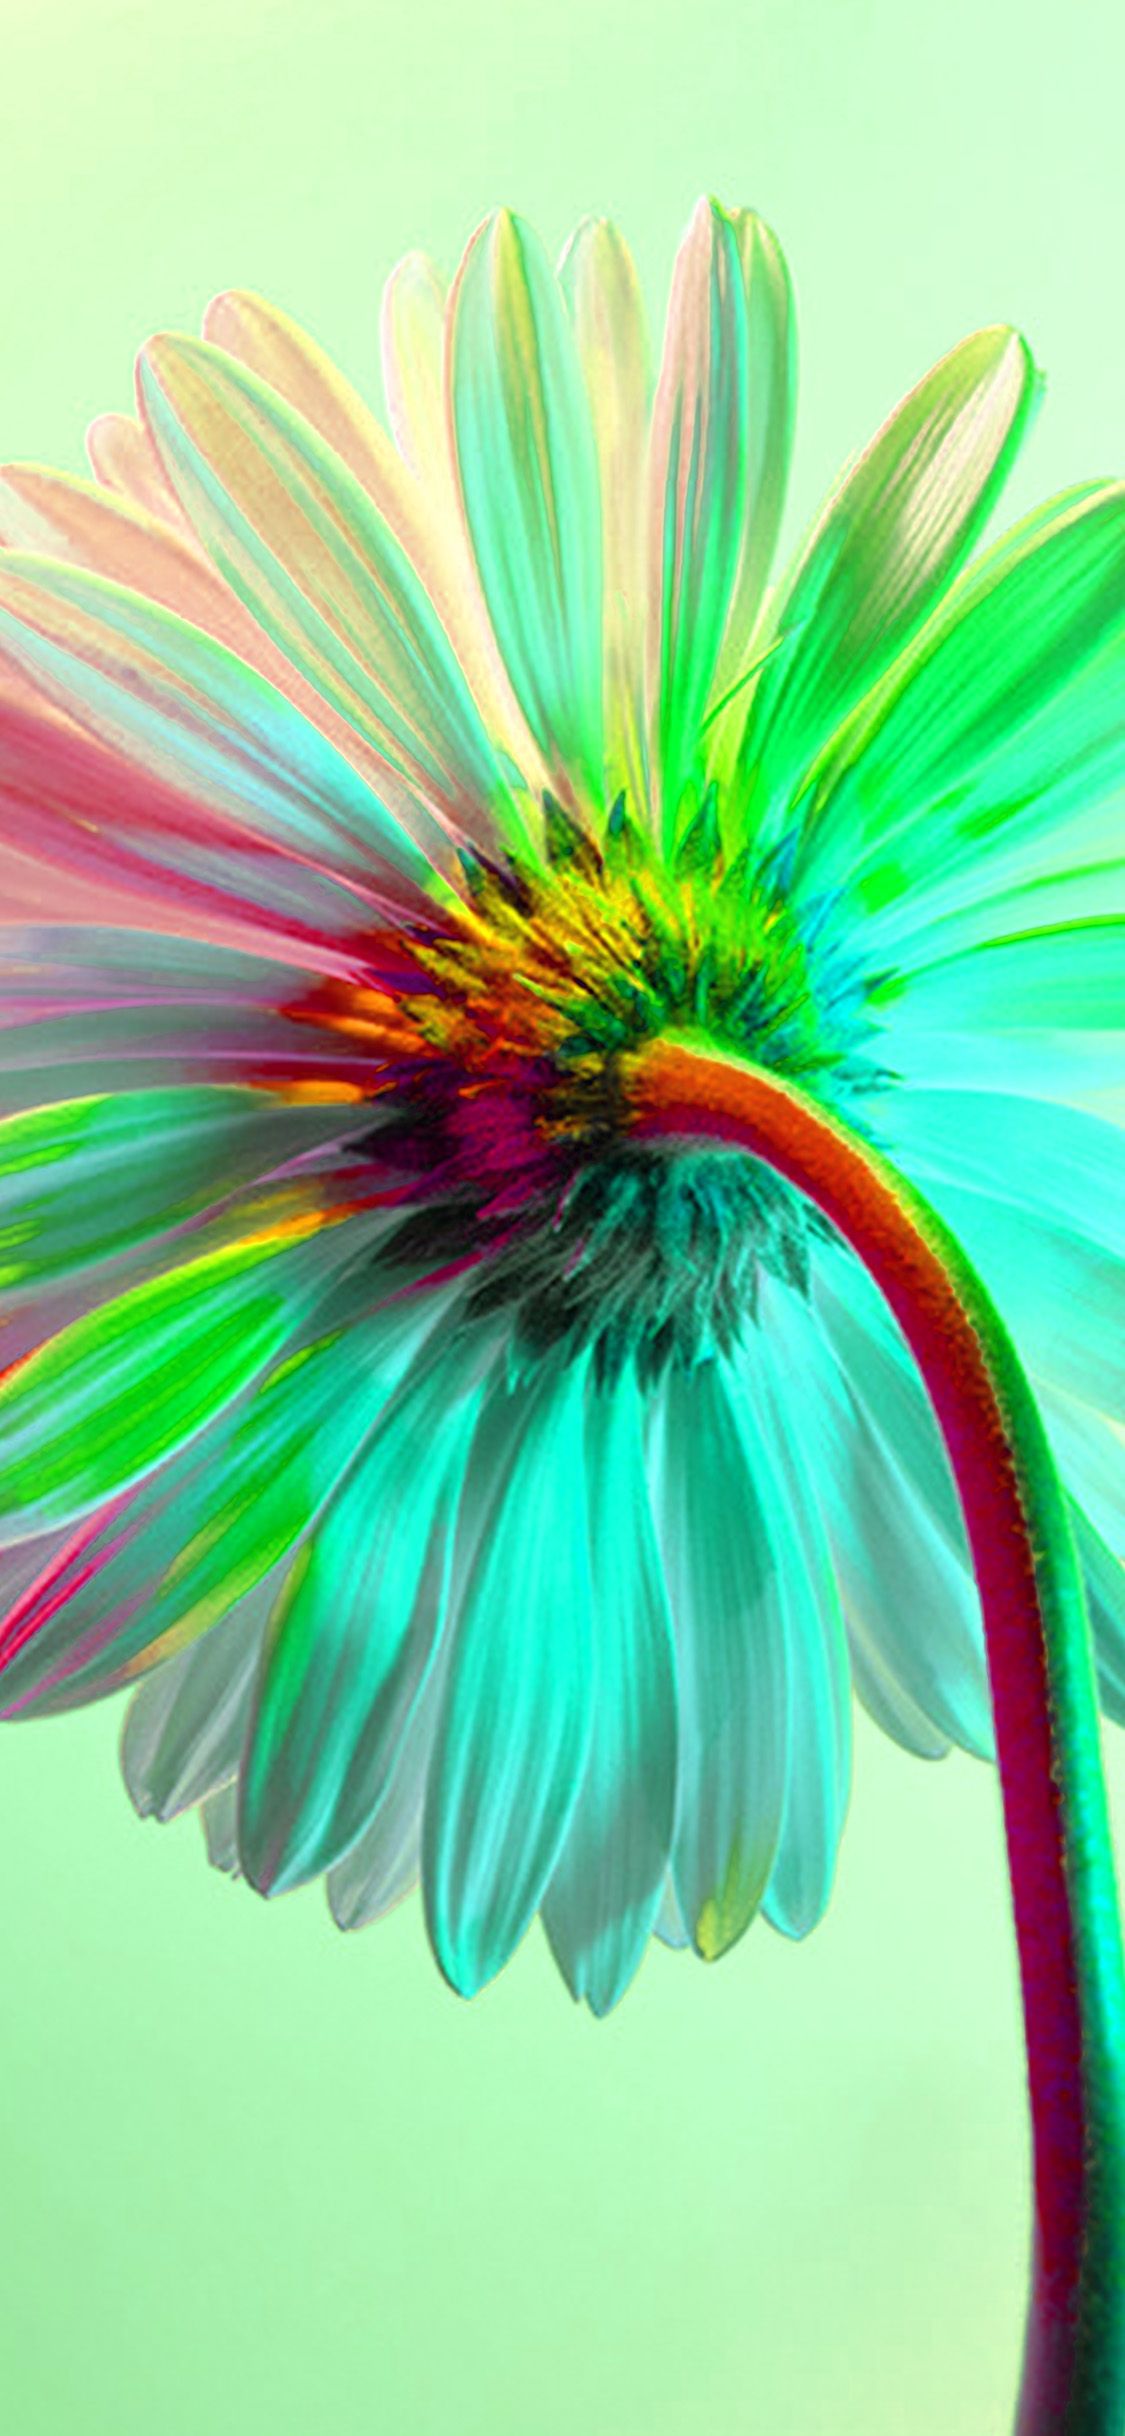 A colorful flower on a green background - Rainbows